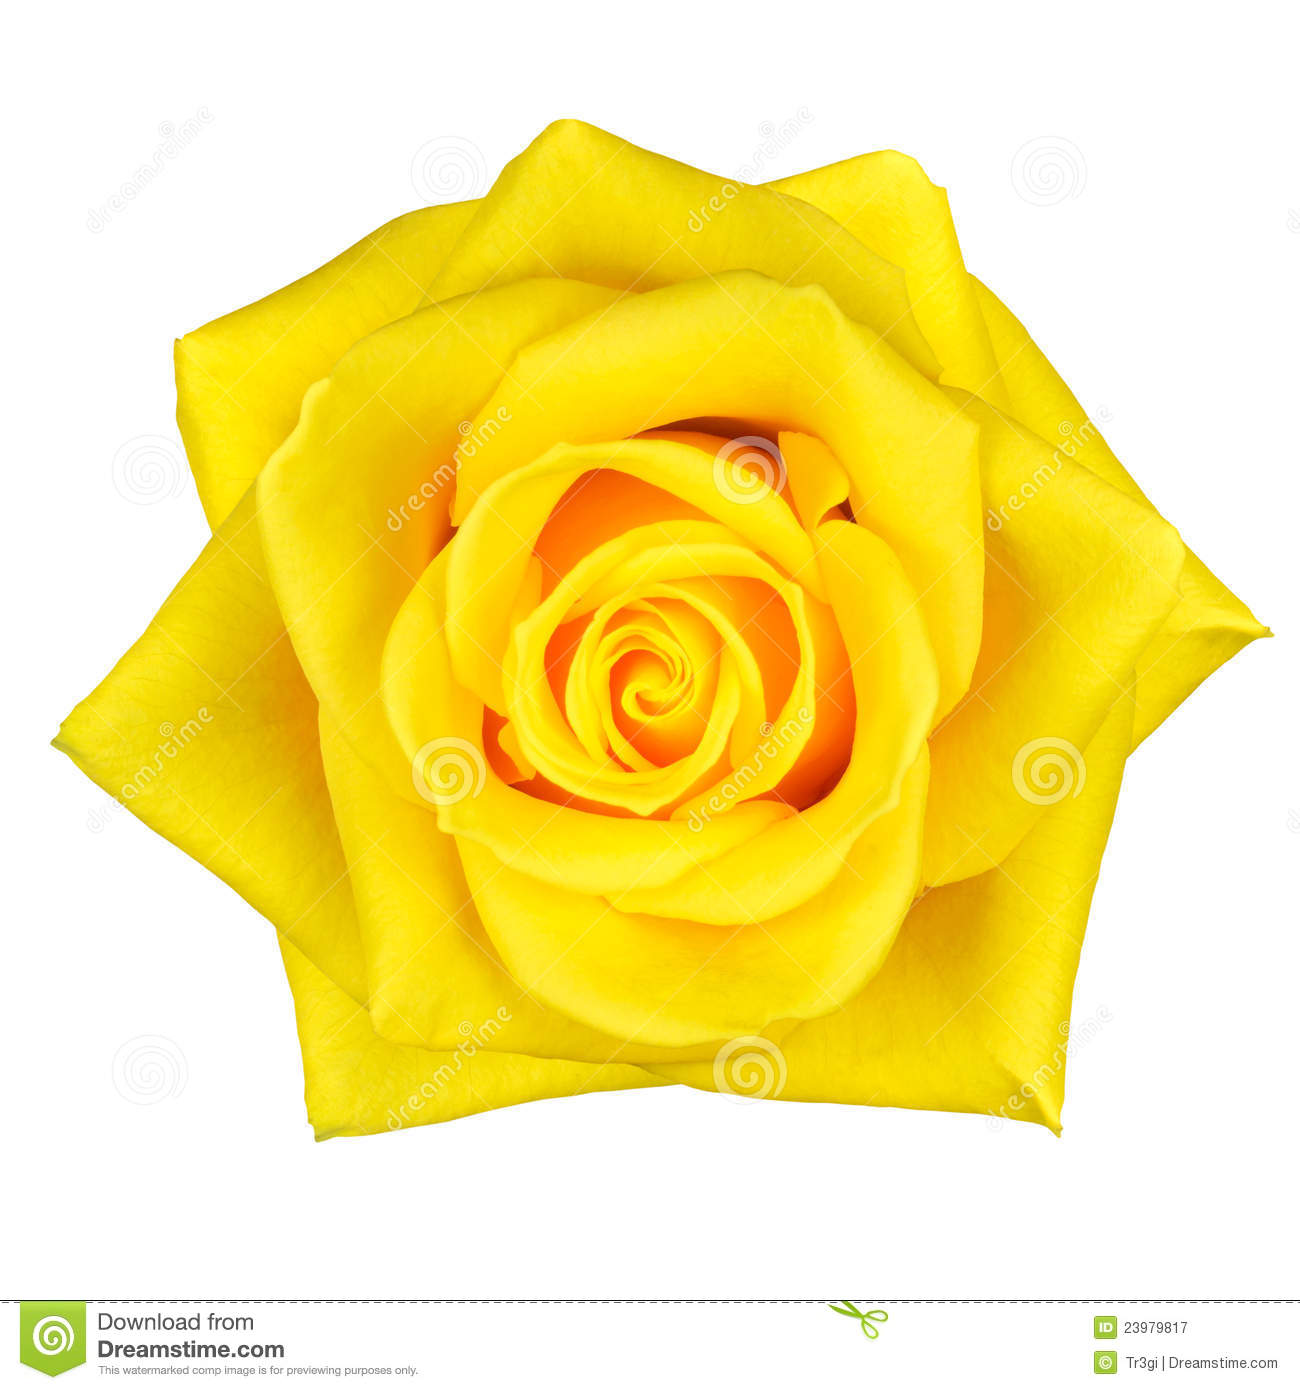 clipart of yellow roses - photo #22